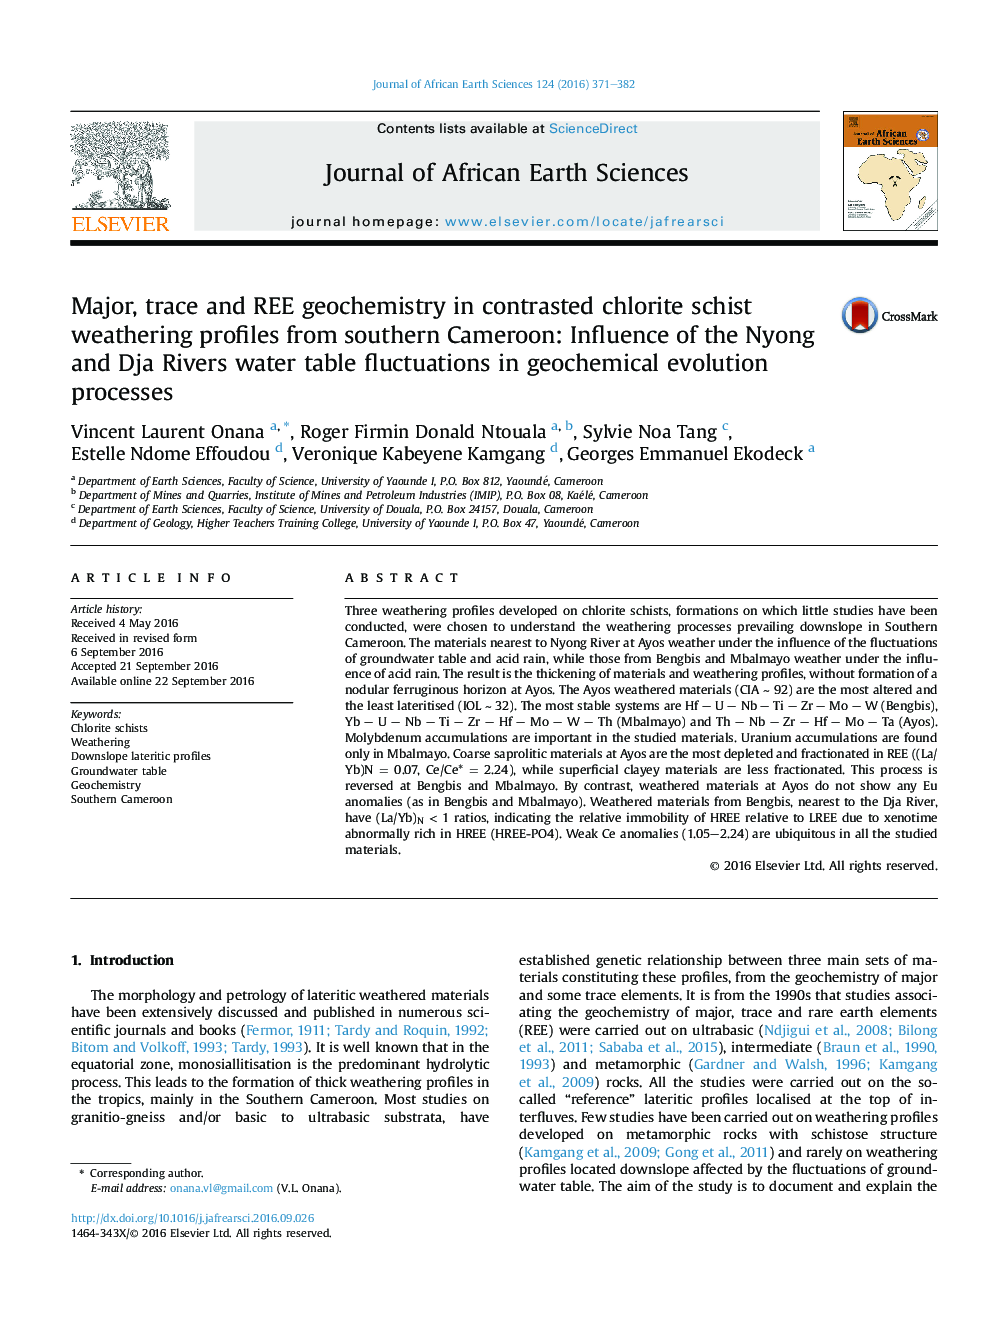 Major, trace and REE geochemistry in contrasted chlorite schist weathering profiles from southern Cameroon: Influence of the Nyong and Dja Rivers water table fluctuations in geochemical evolution processes